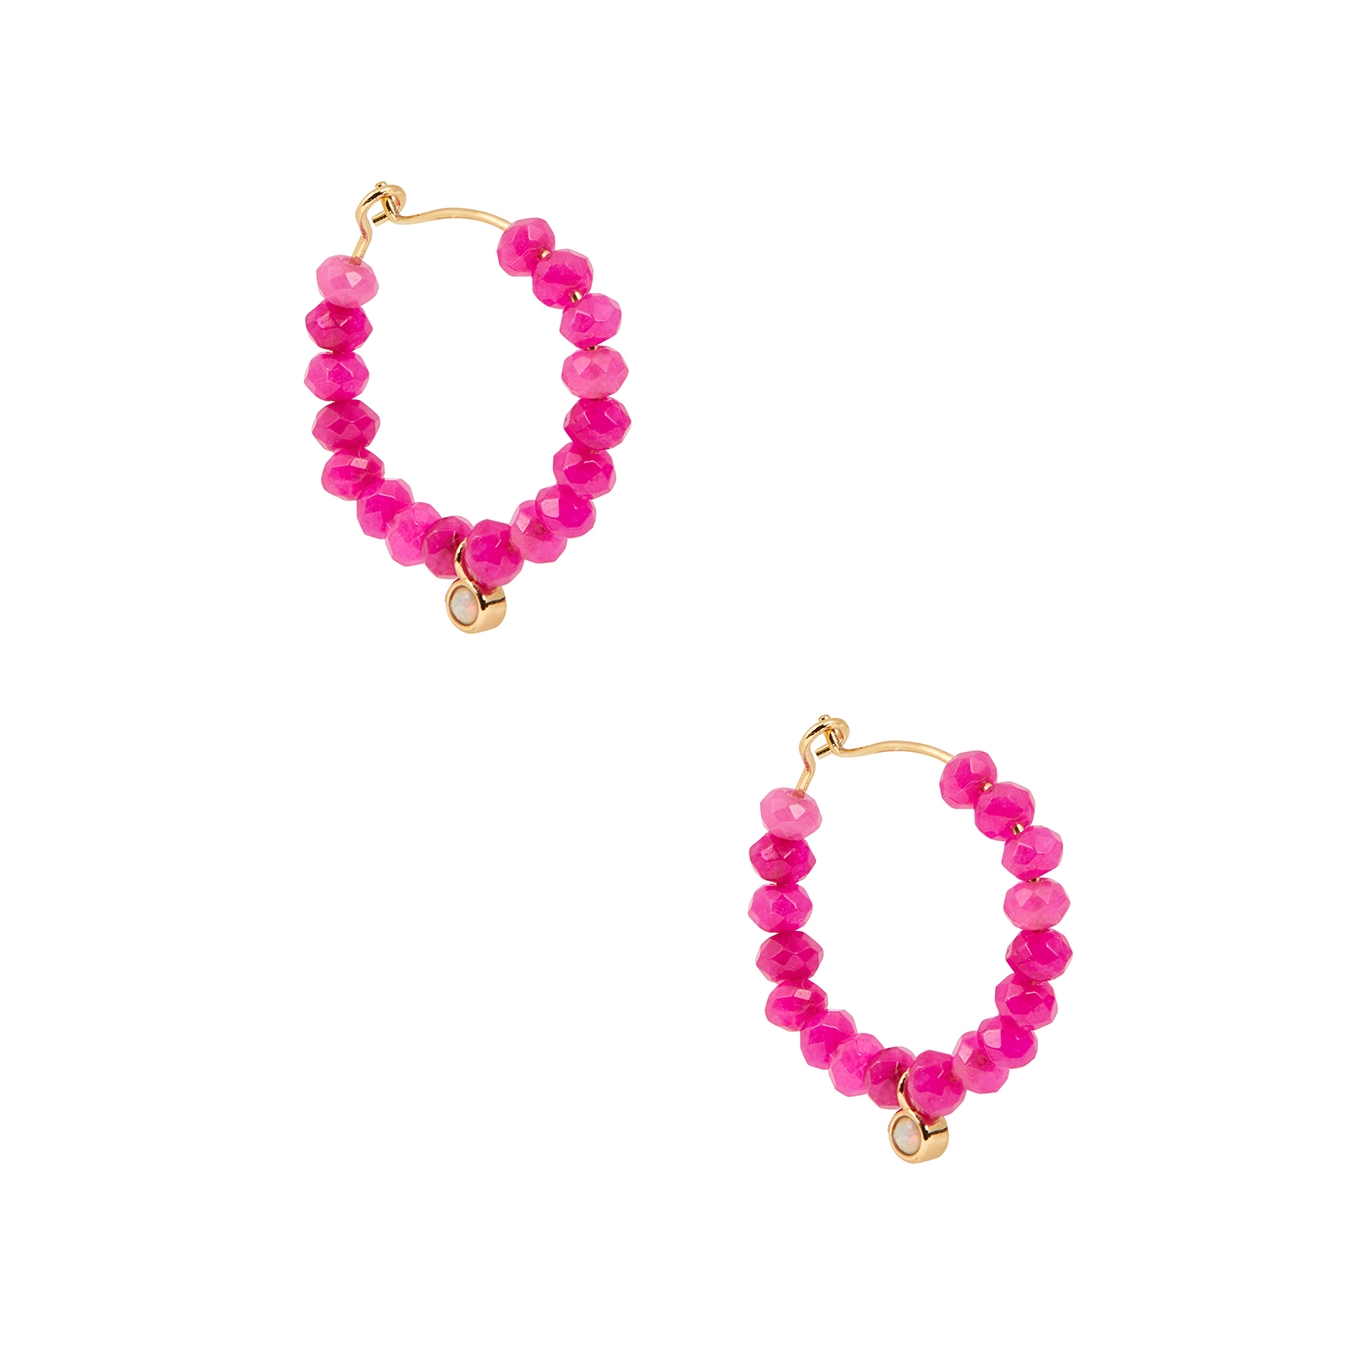 Anni LU Pump Up The Jam 18kt Gold-plated Beaded Hoop Earrings - Pink - One Size